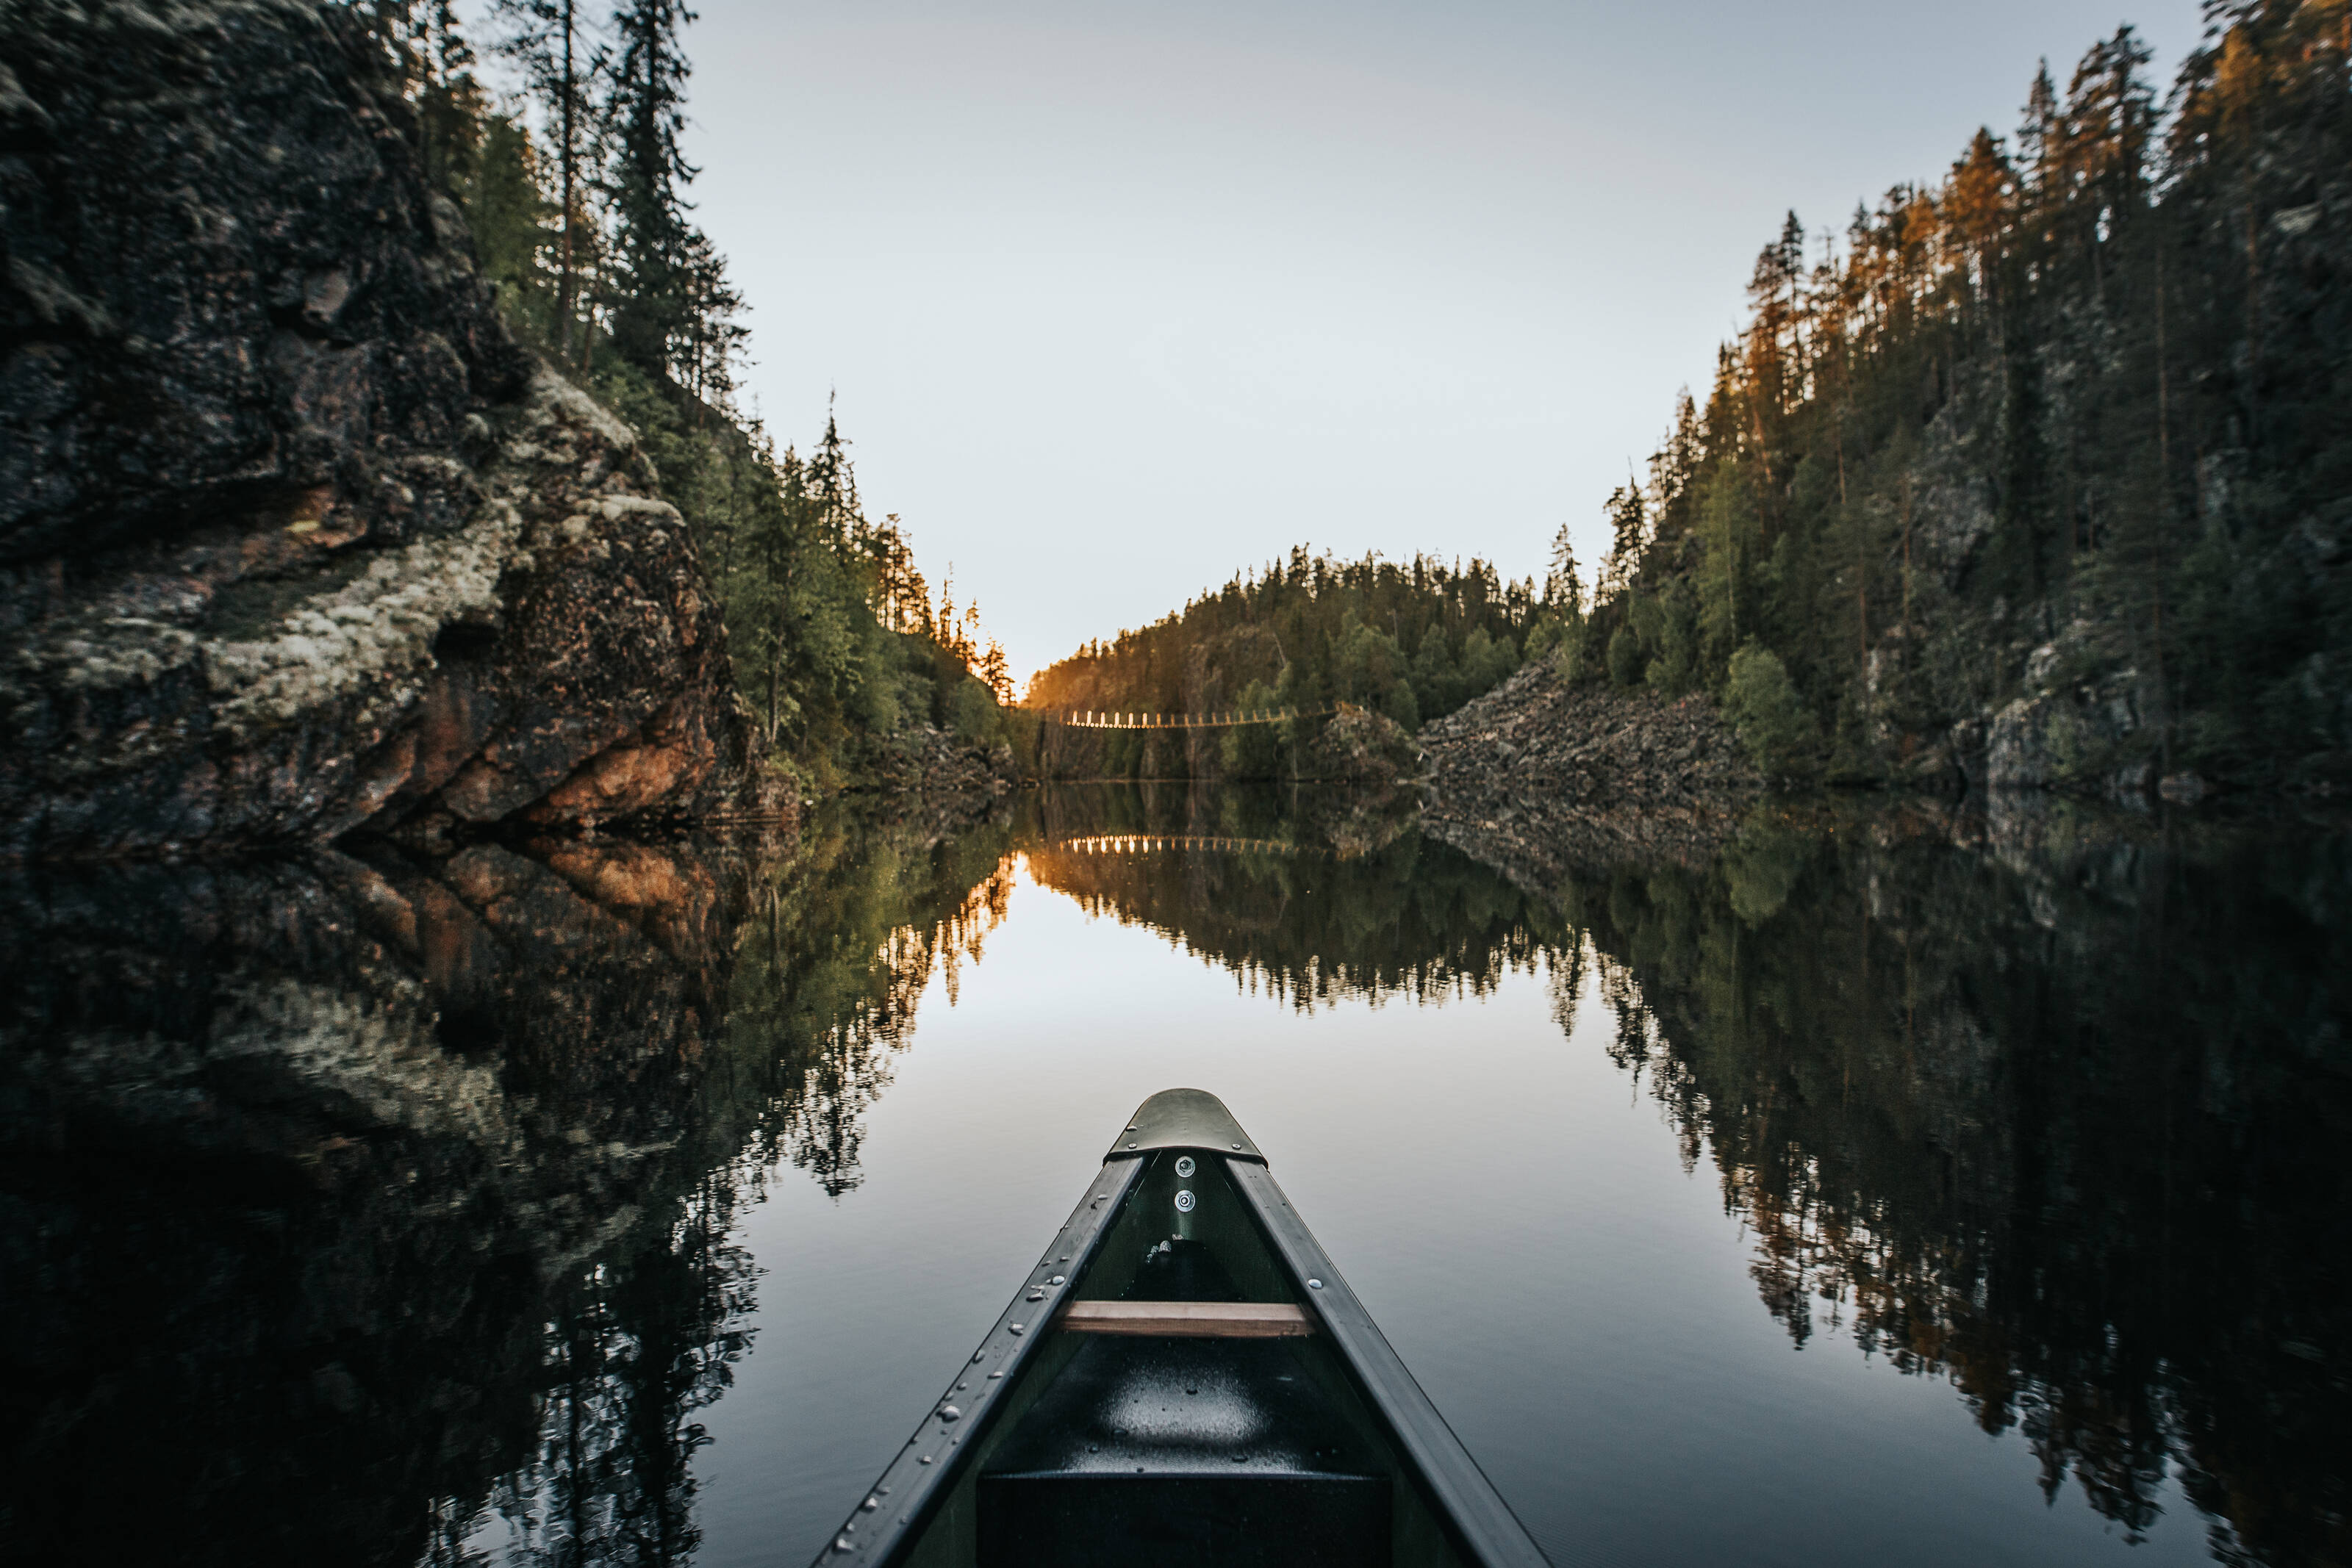 kayaking in Finnish national landscapes on a lake in the middle of a forest